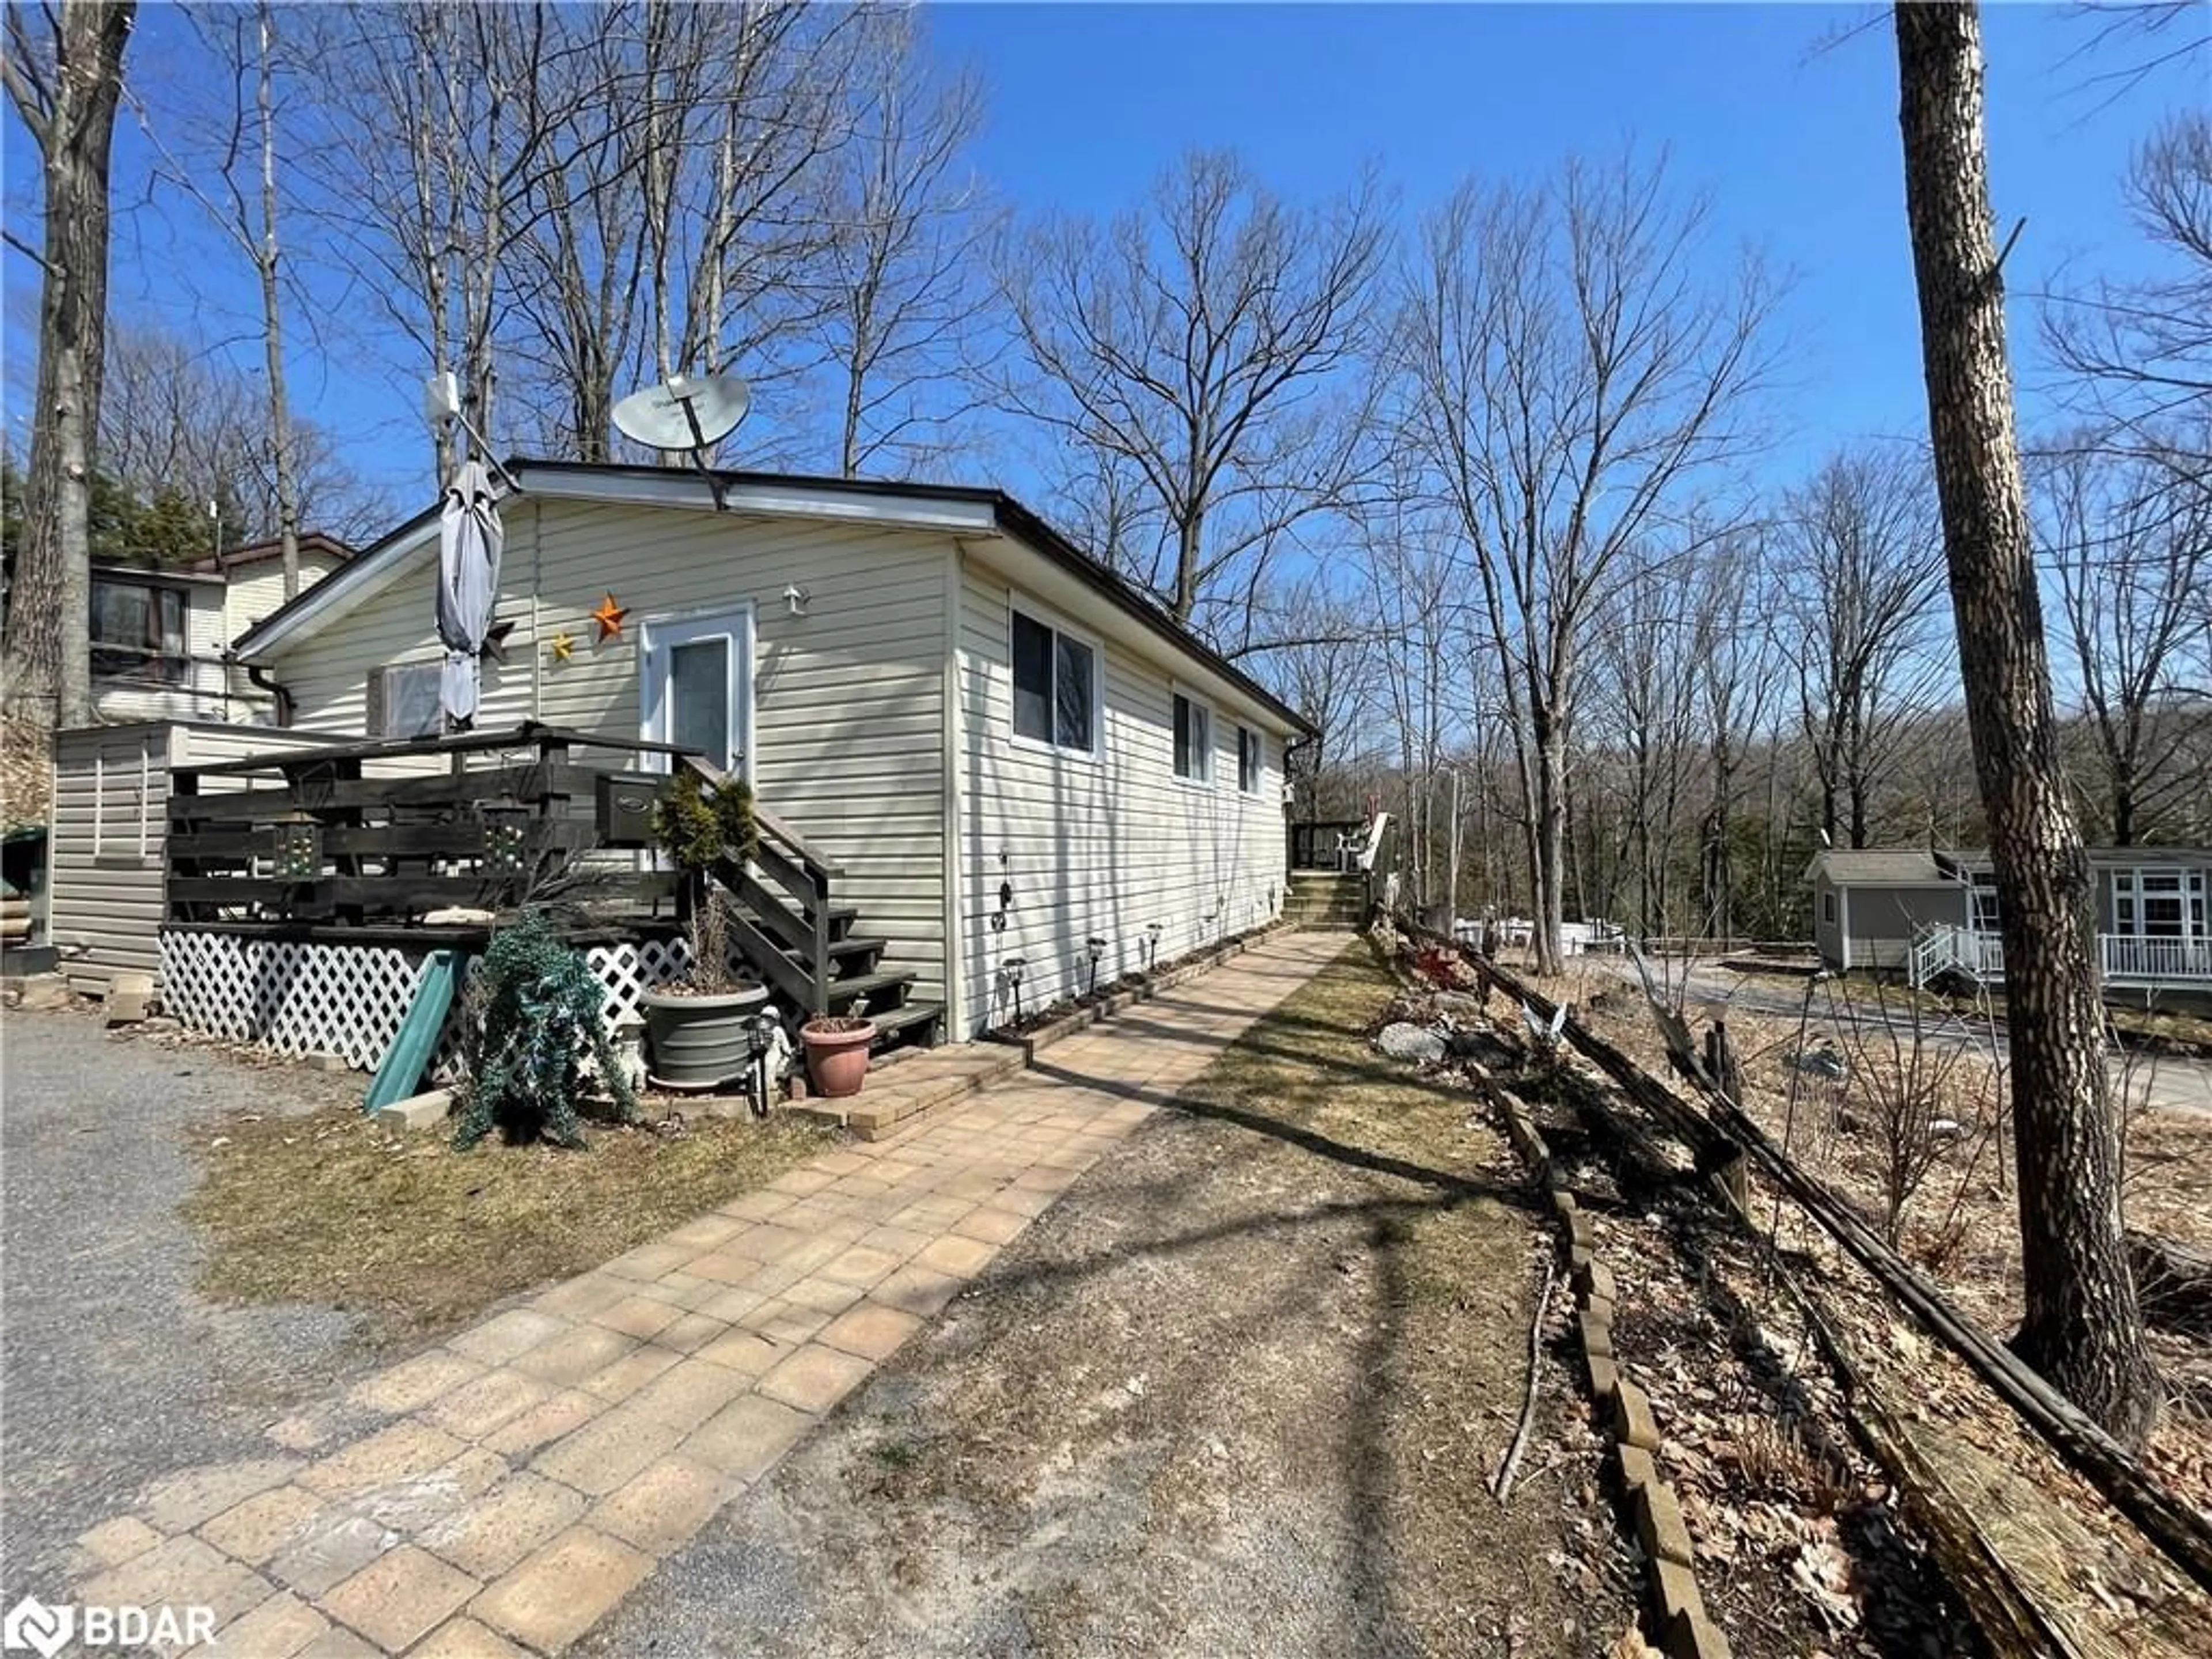 Cottage for 302 Quin-Mo-Lac Rd #133, Madoc Ontario K0K 2K0